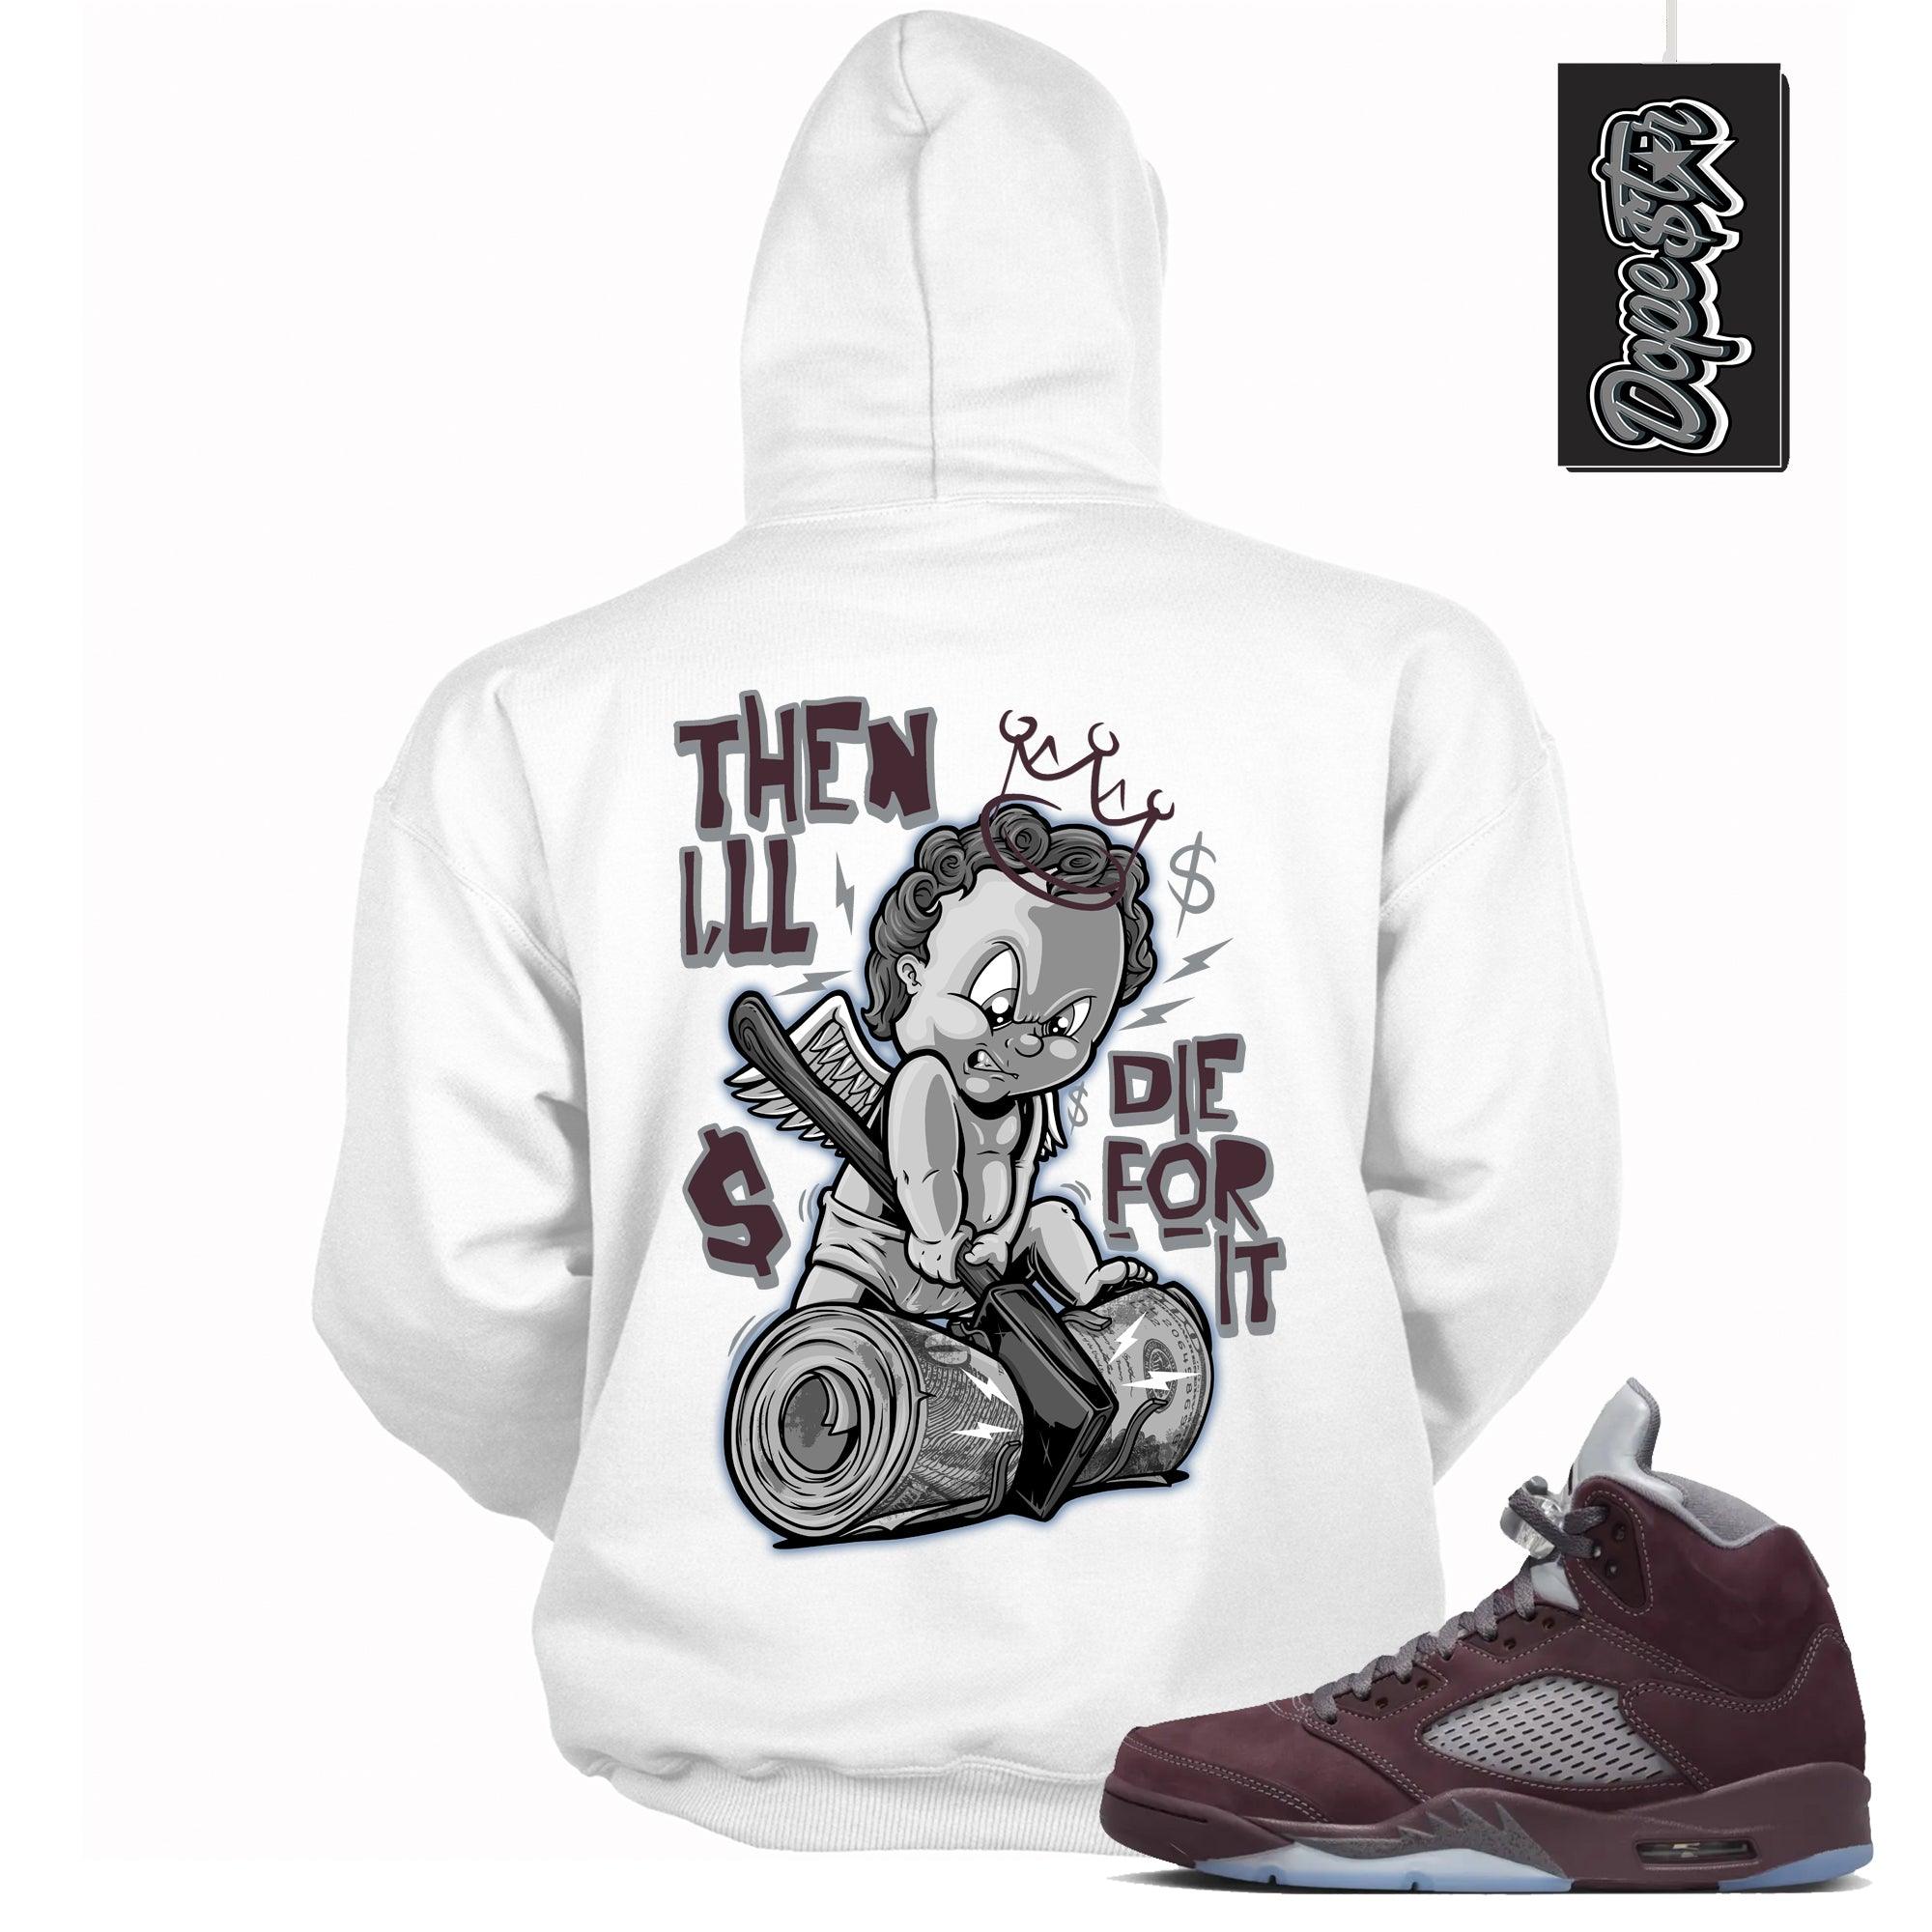 Cool White Graphic Hoodie with “ Then I’ll 2 “ print, that perfectly matches Air Jordan 5 Burgundy 2023 sneakers